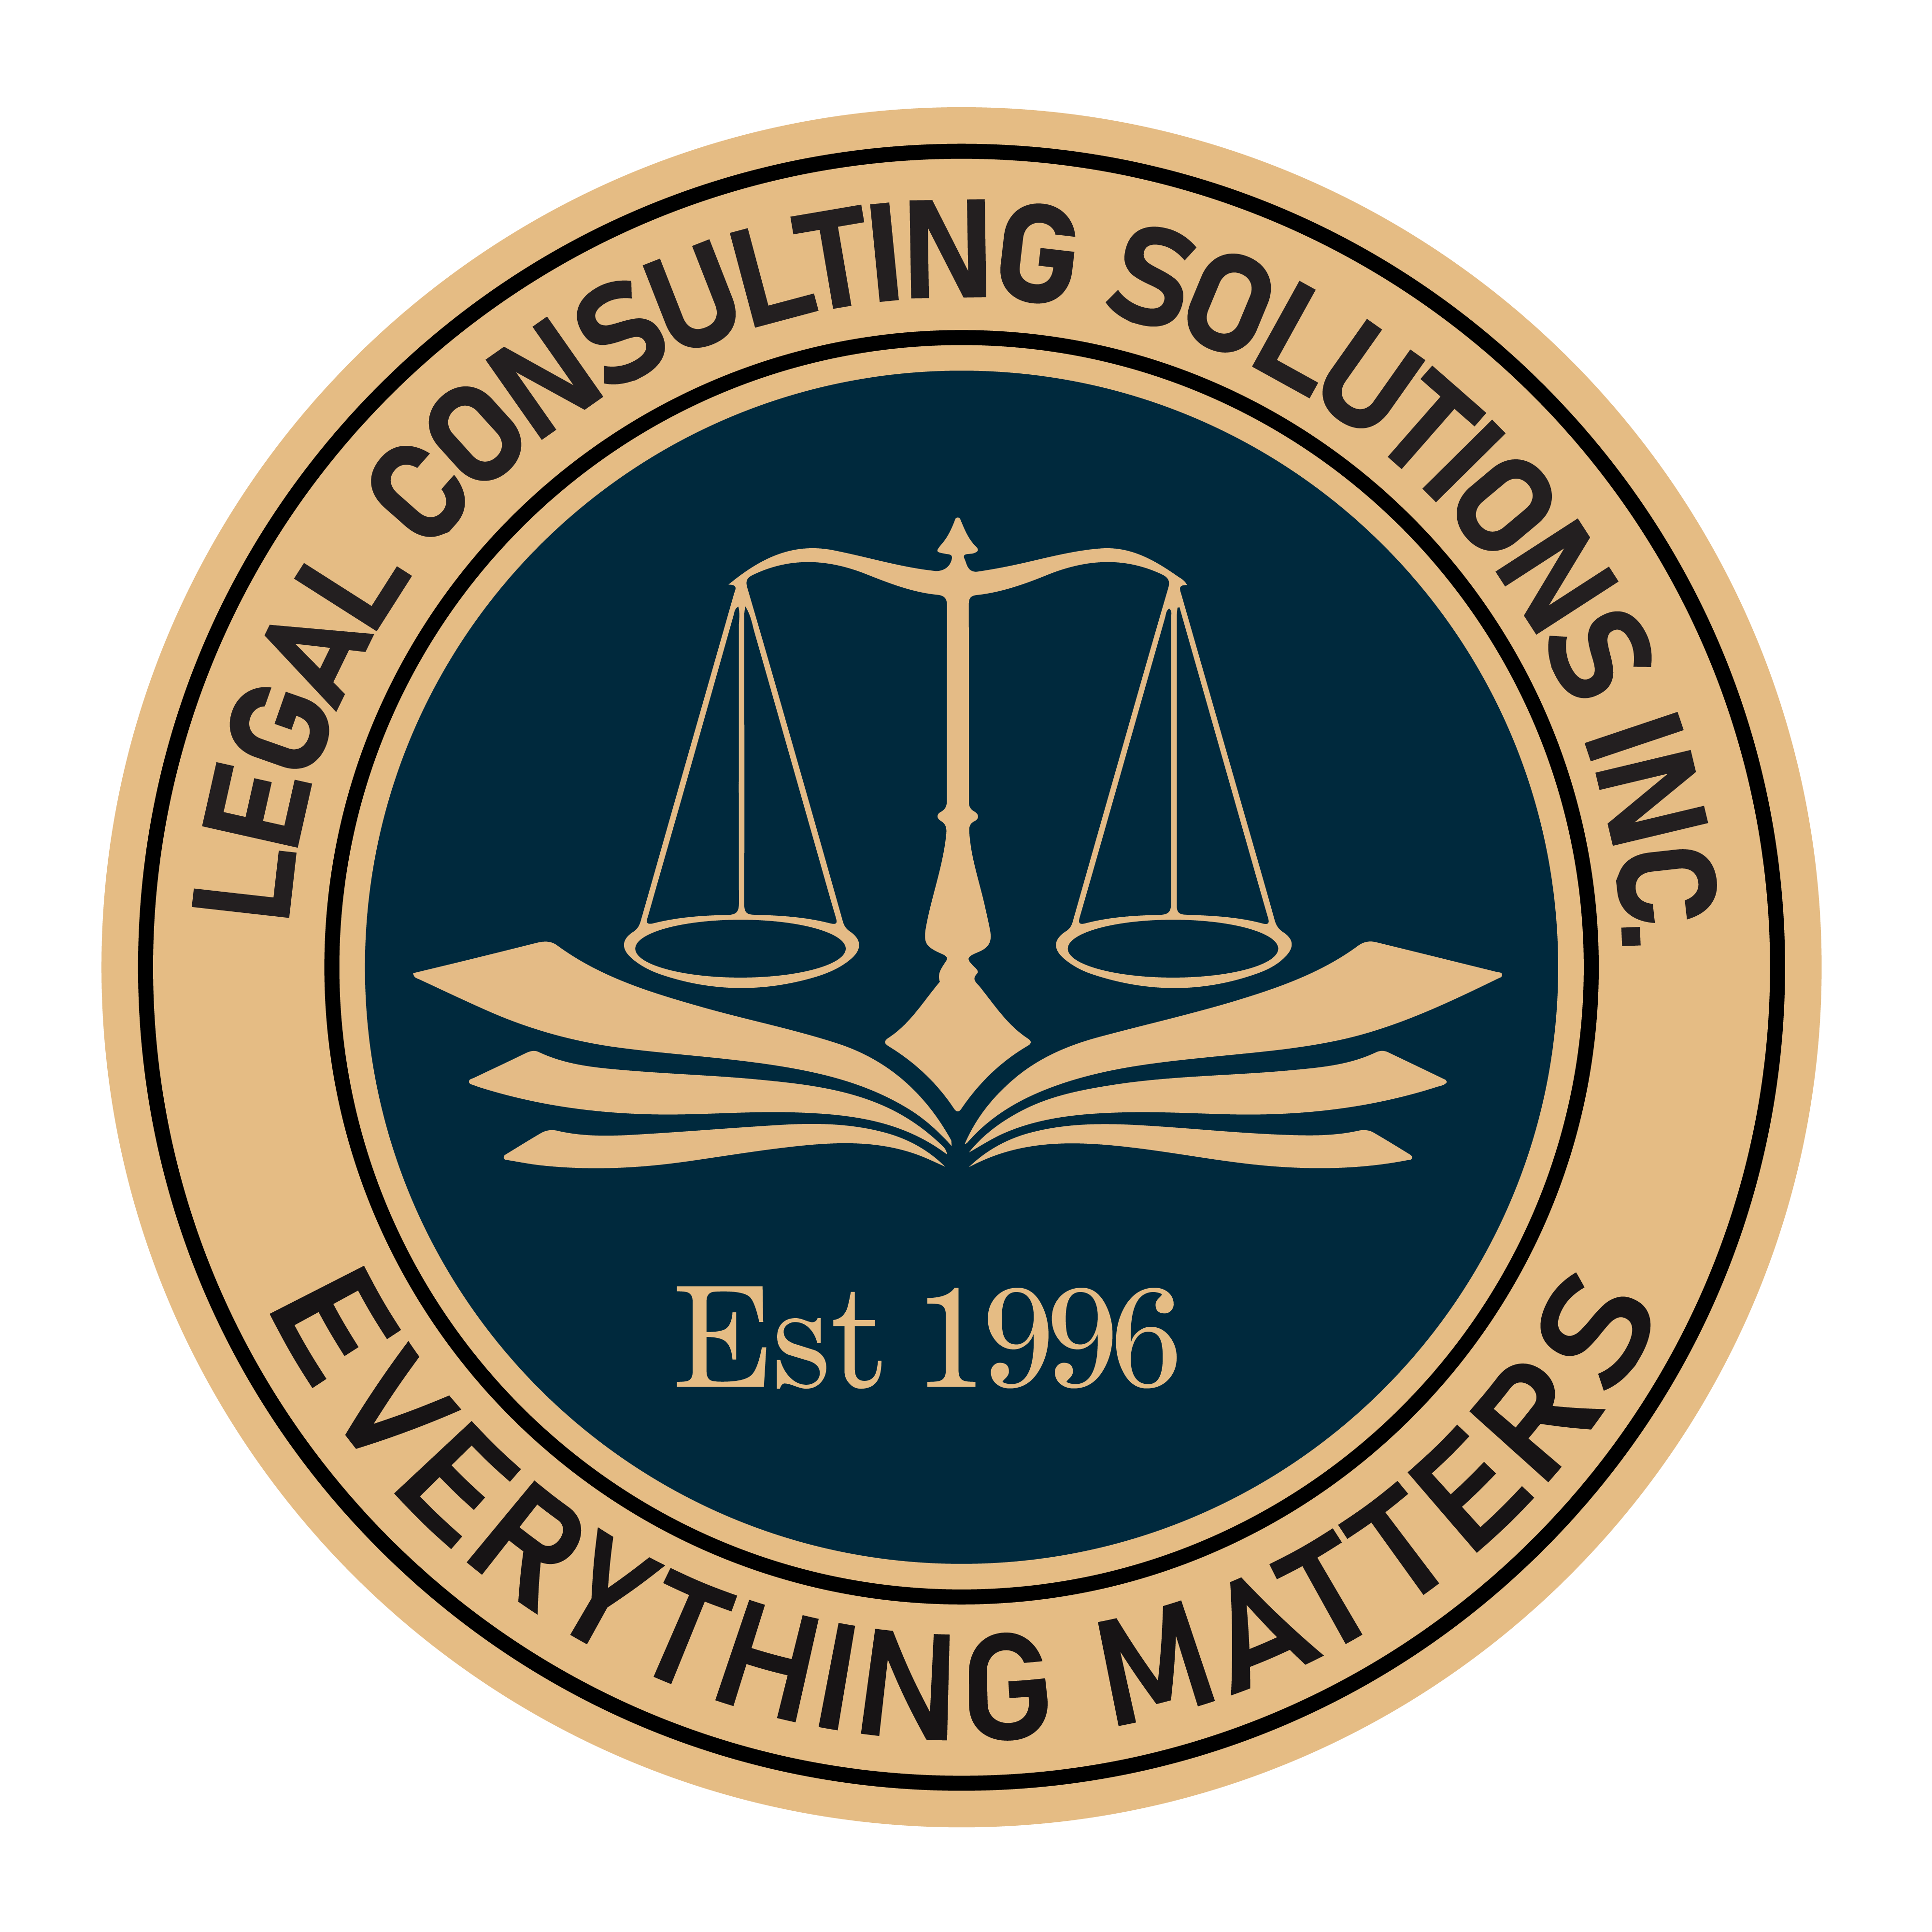 Legal Consulting Solutions